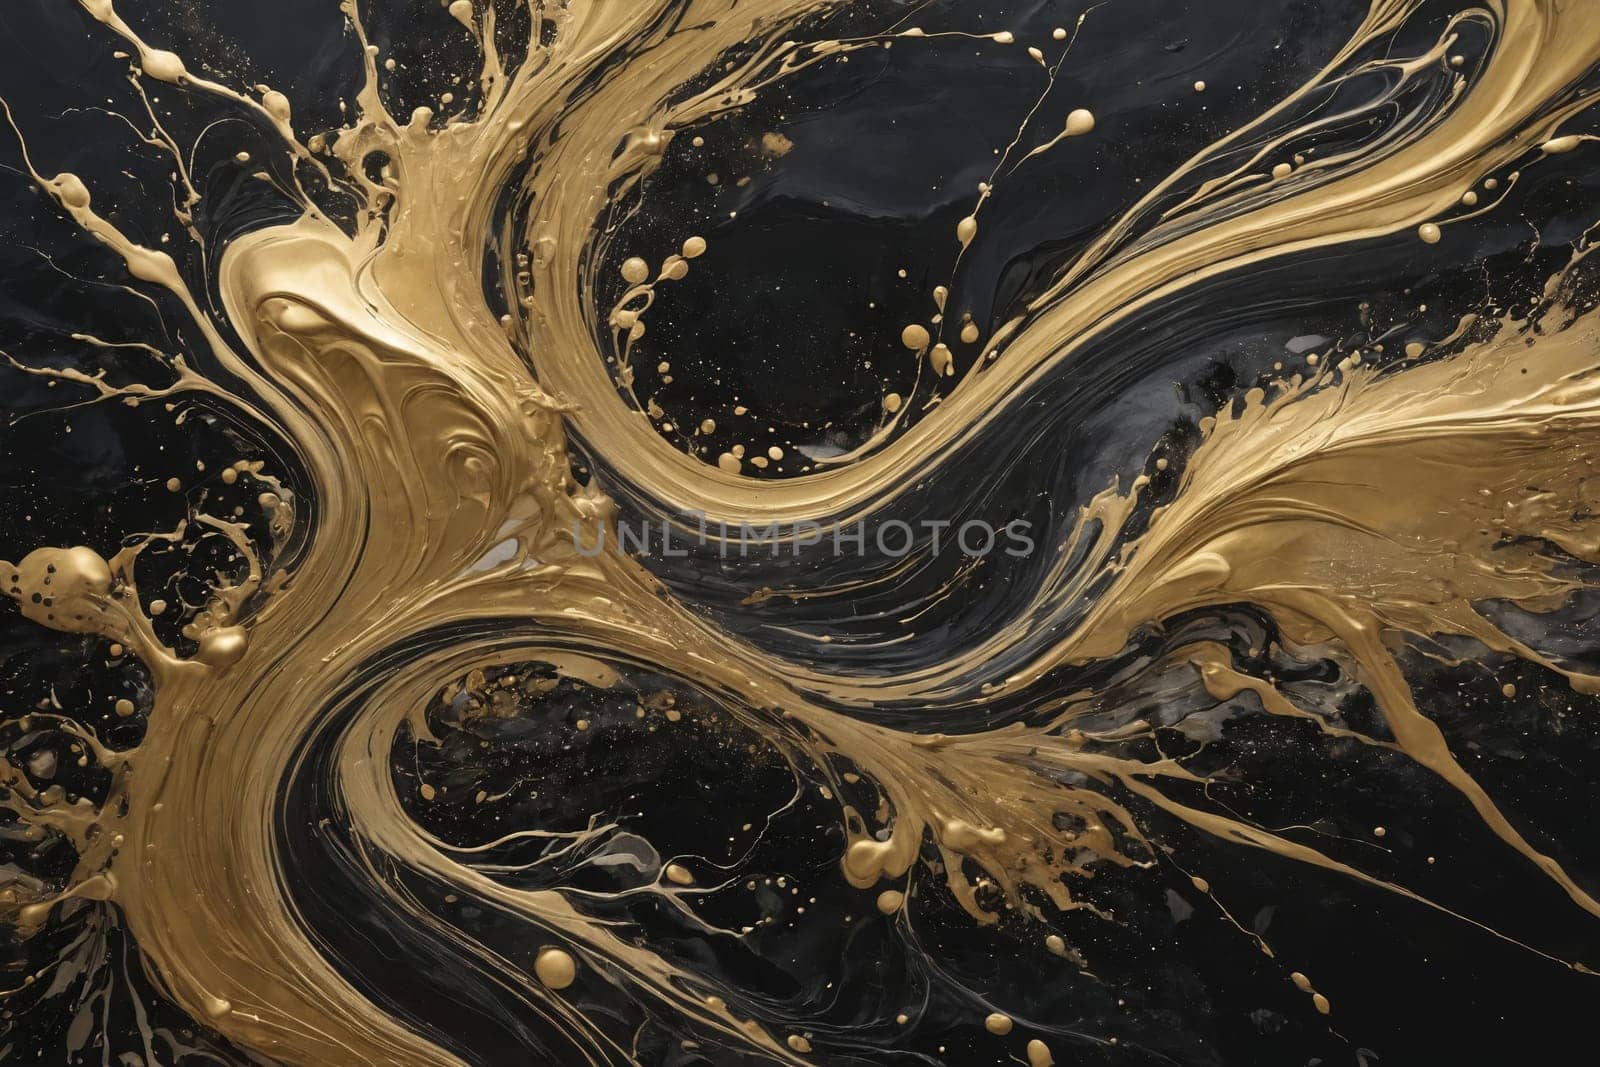 Abstract Fusion: The Intimacy of Black Meets Gold by Andre1ns